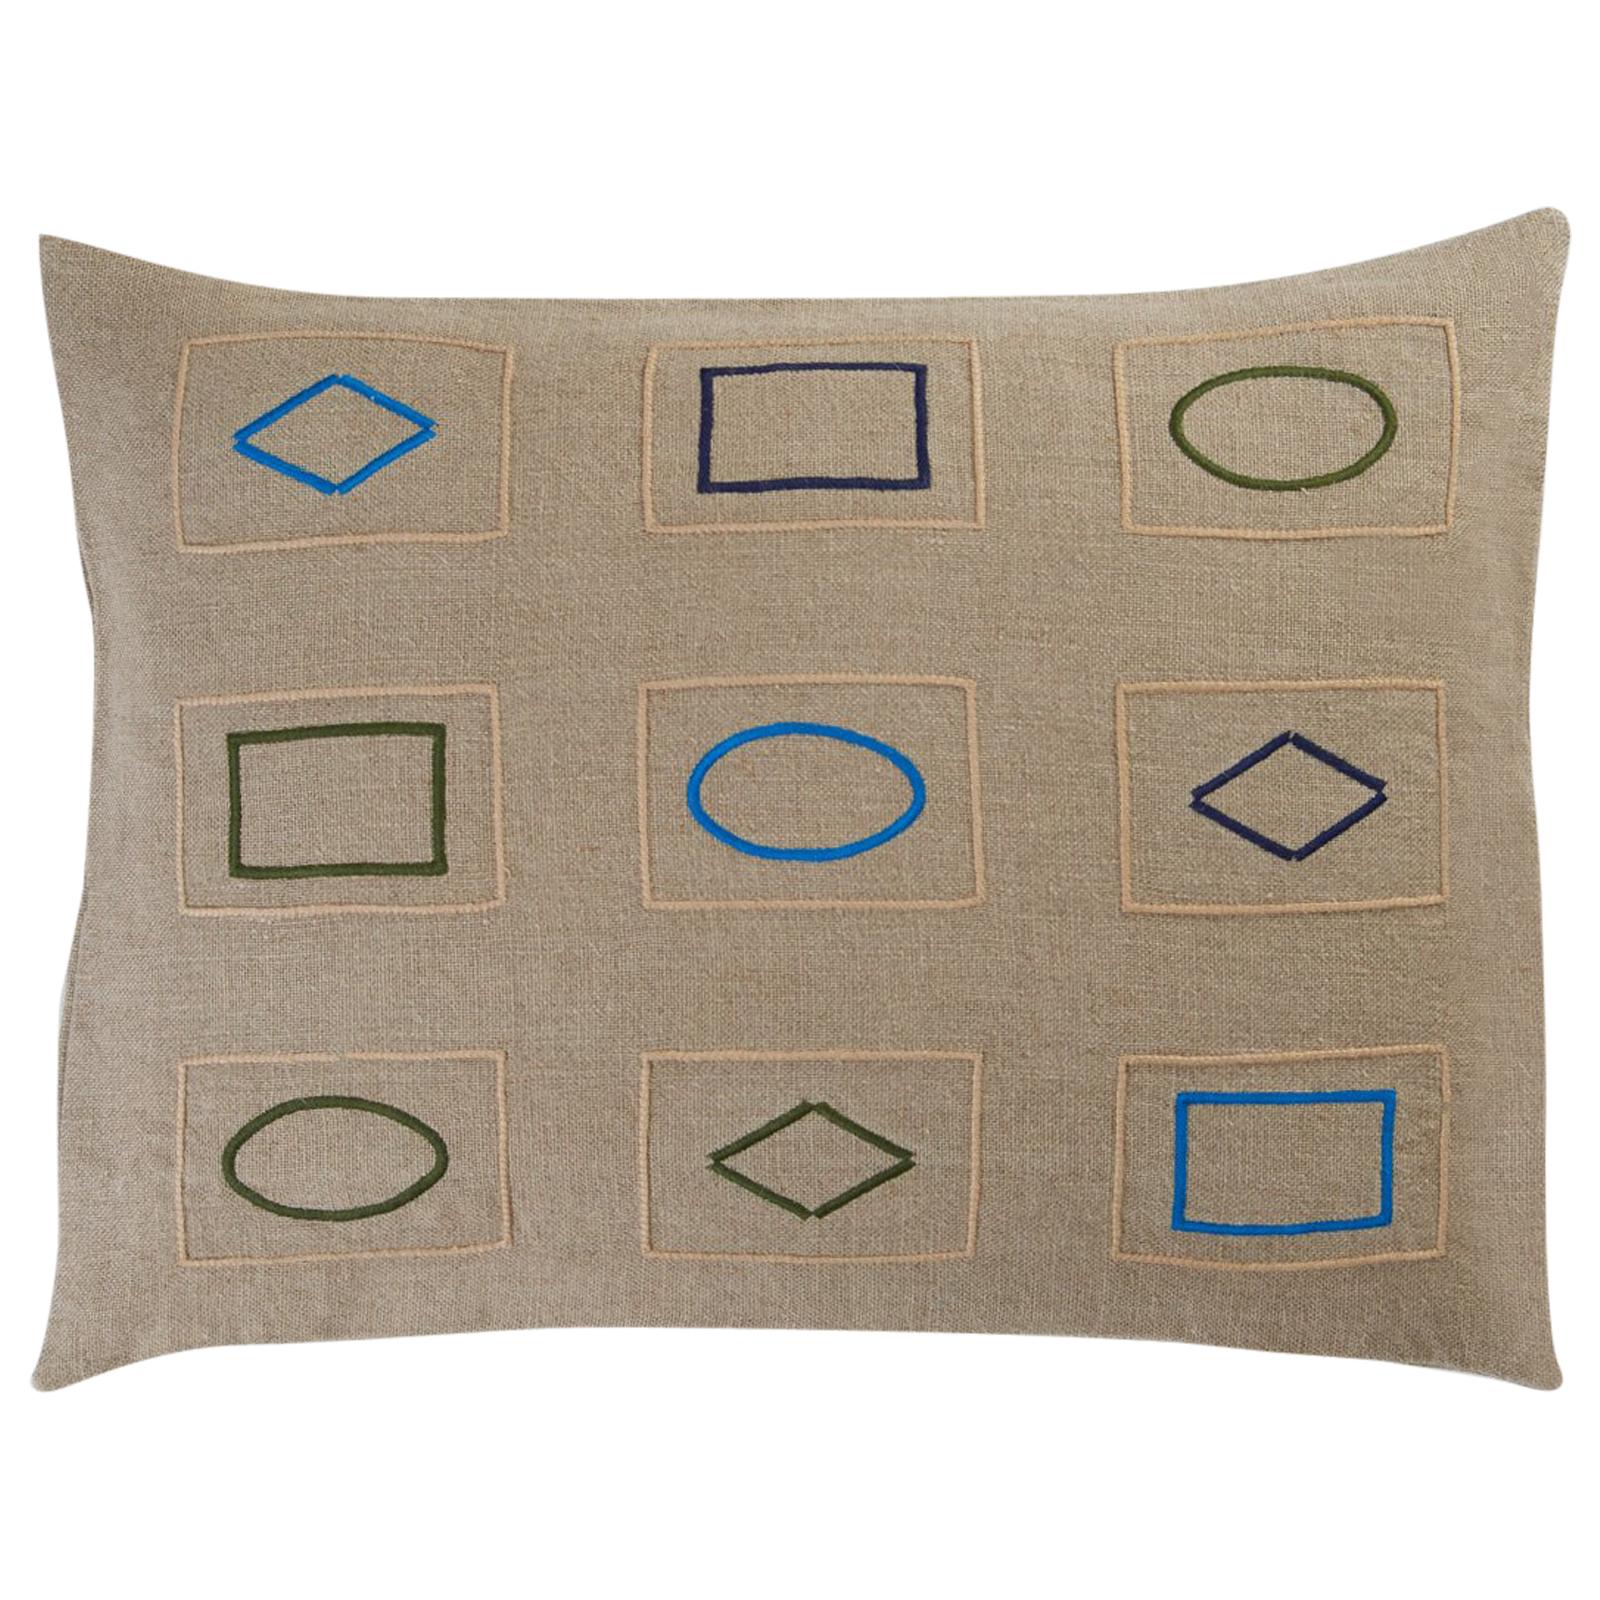 Barberton BG Hand Embroidered Beige Linen Pillow Cover For Sale